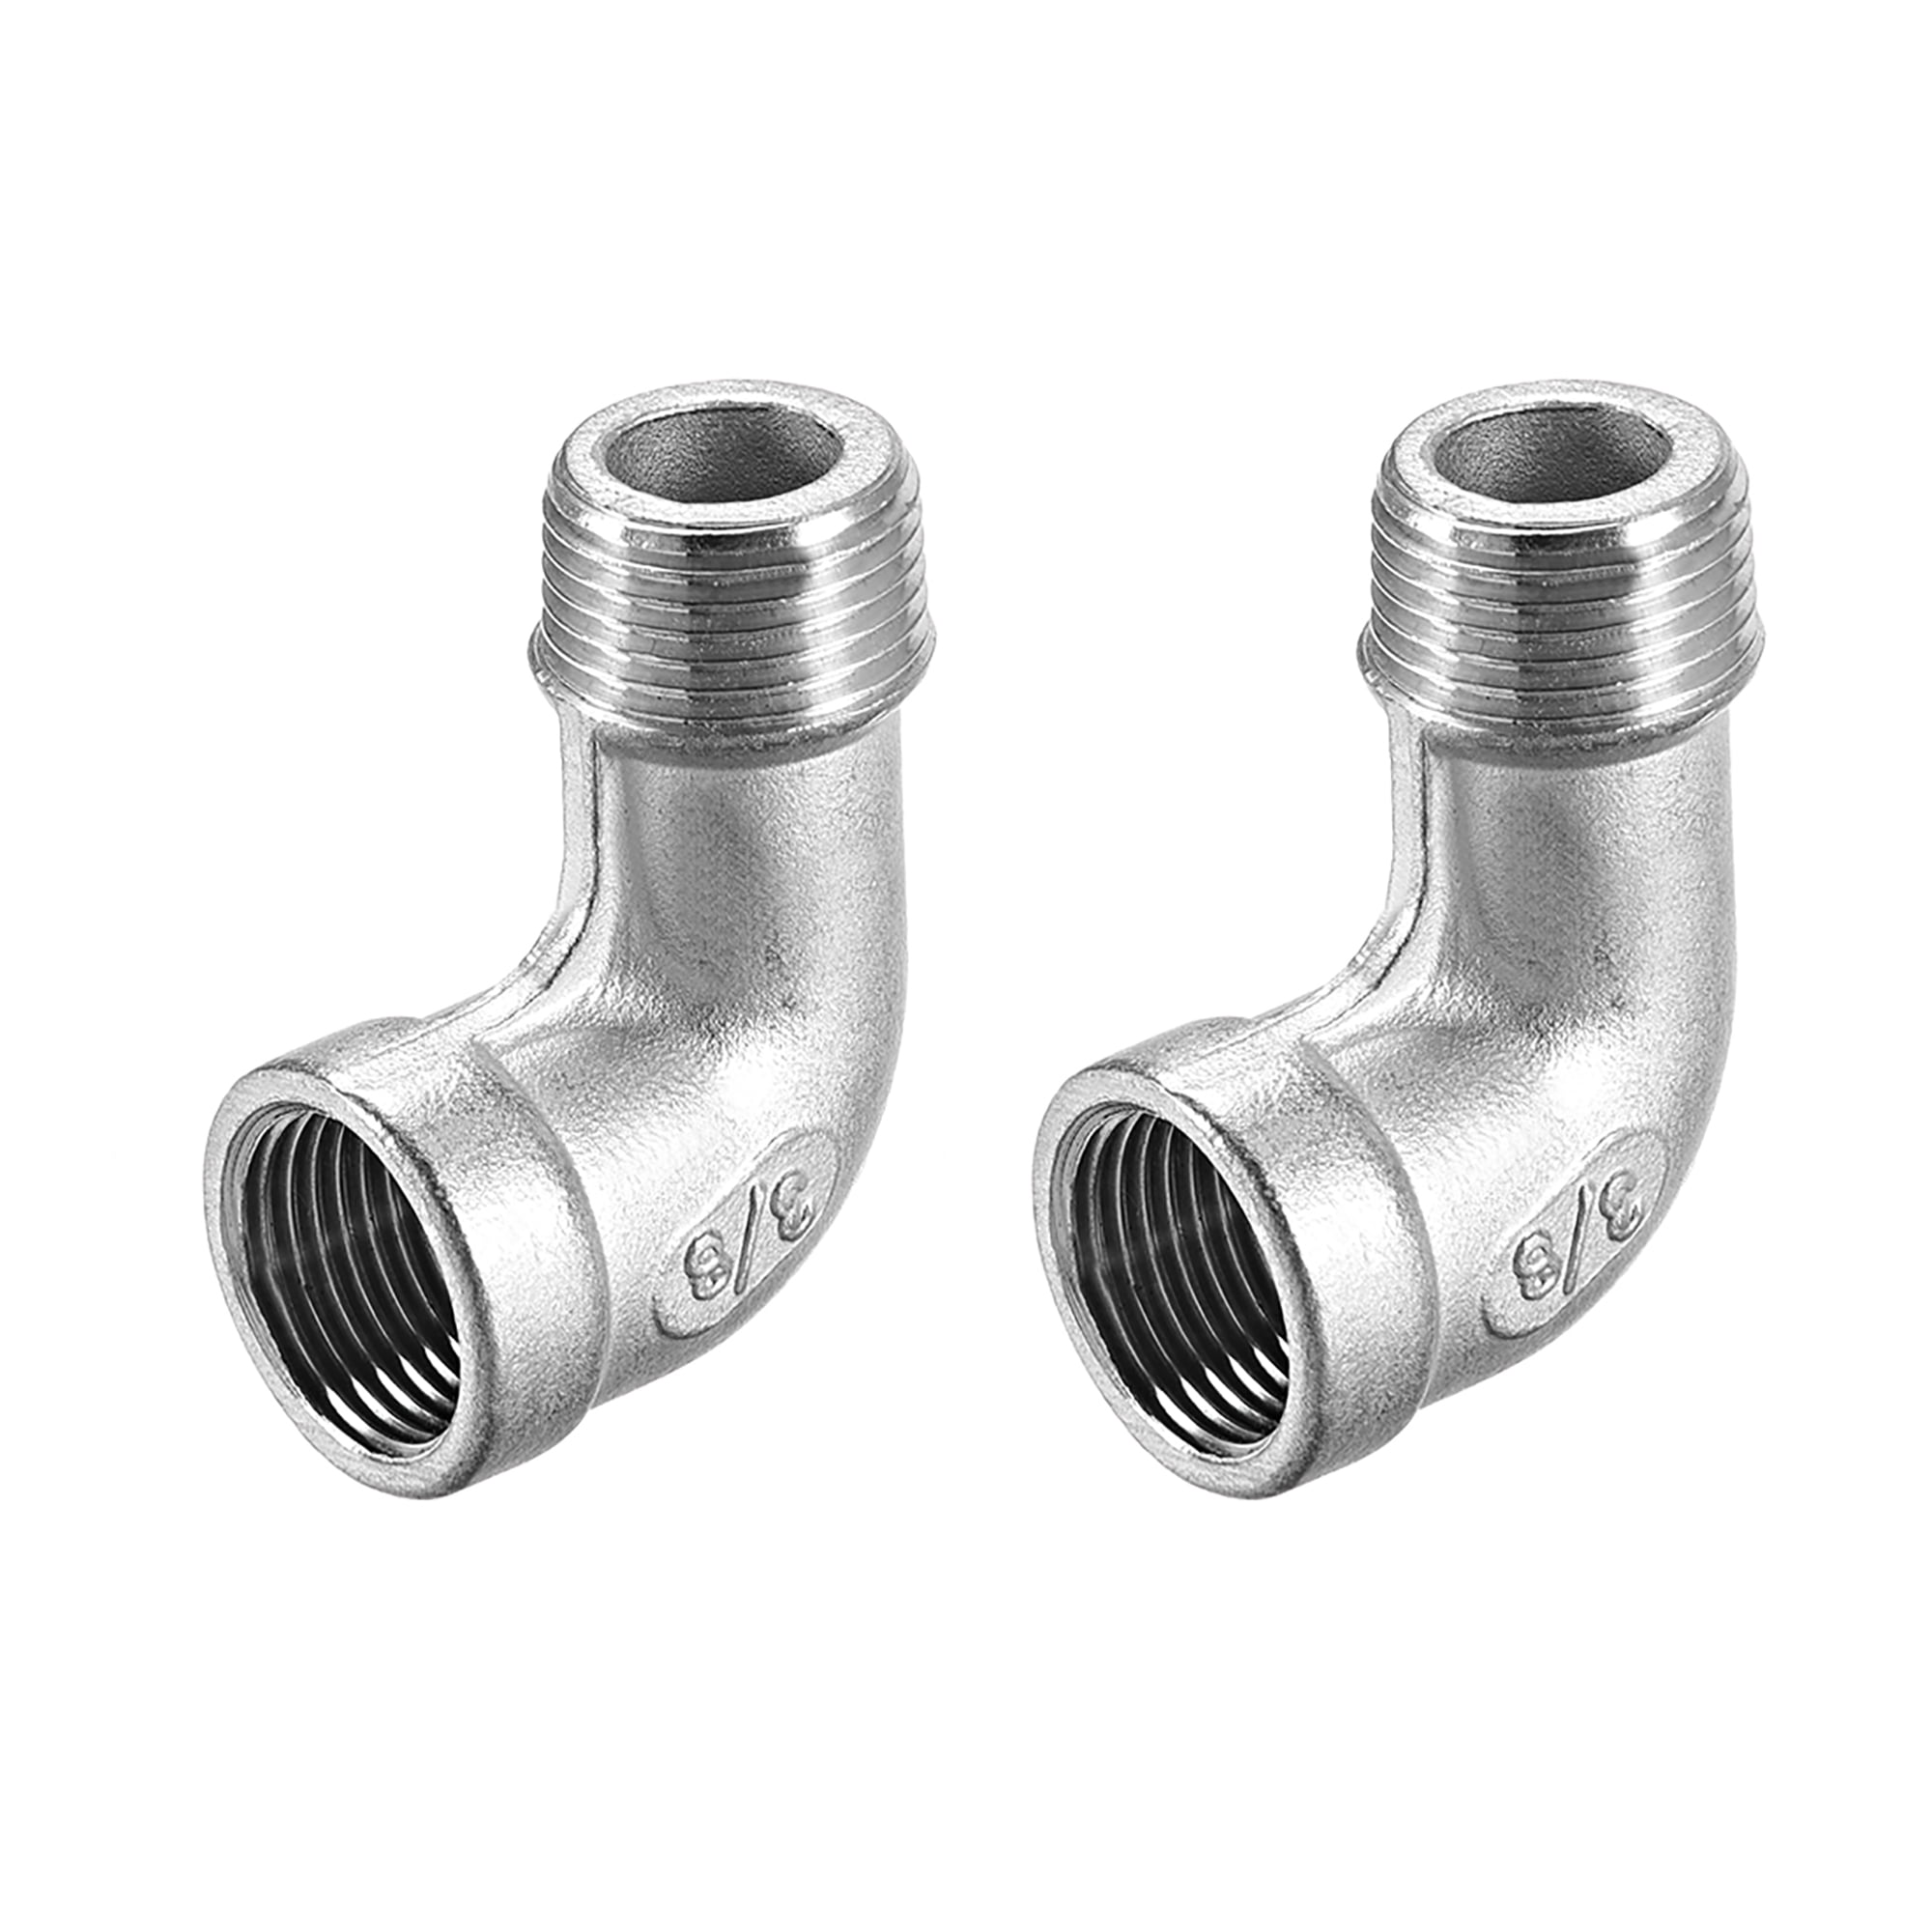 1/2" 0.5" Female x Female Threaded Pipe Fitting Stainless Steel SS 304 BSPT 